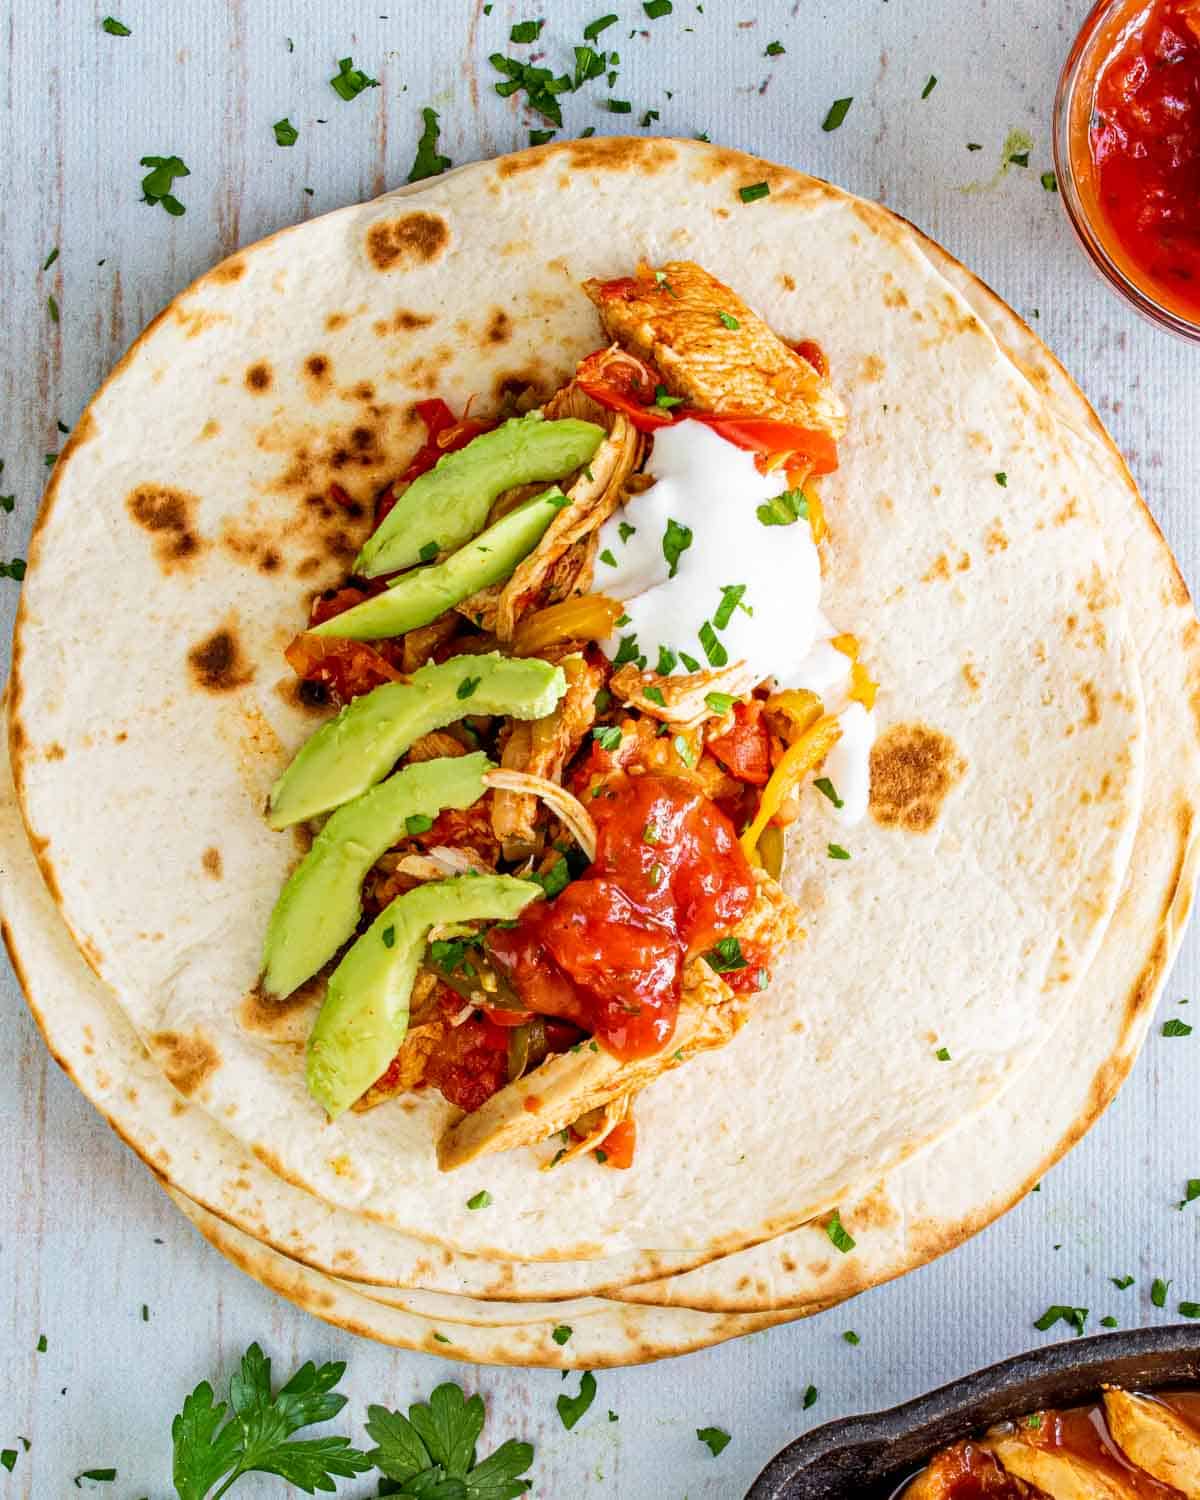 chicken fajitas on a tortilla garnished with sour cream, avocados and limes.